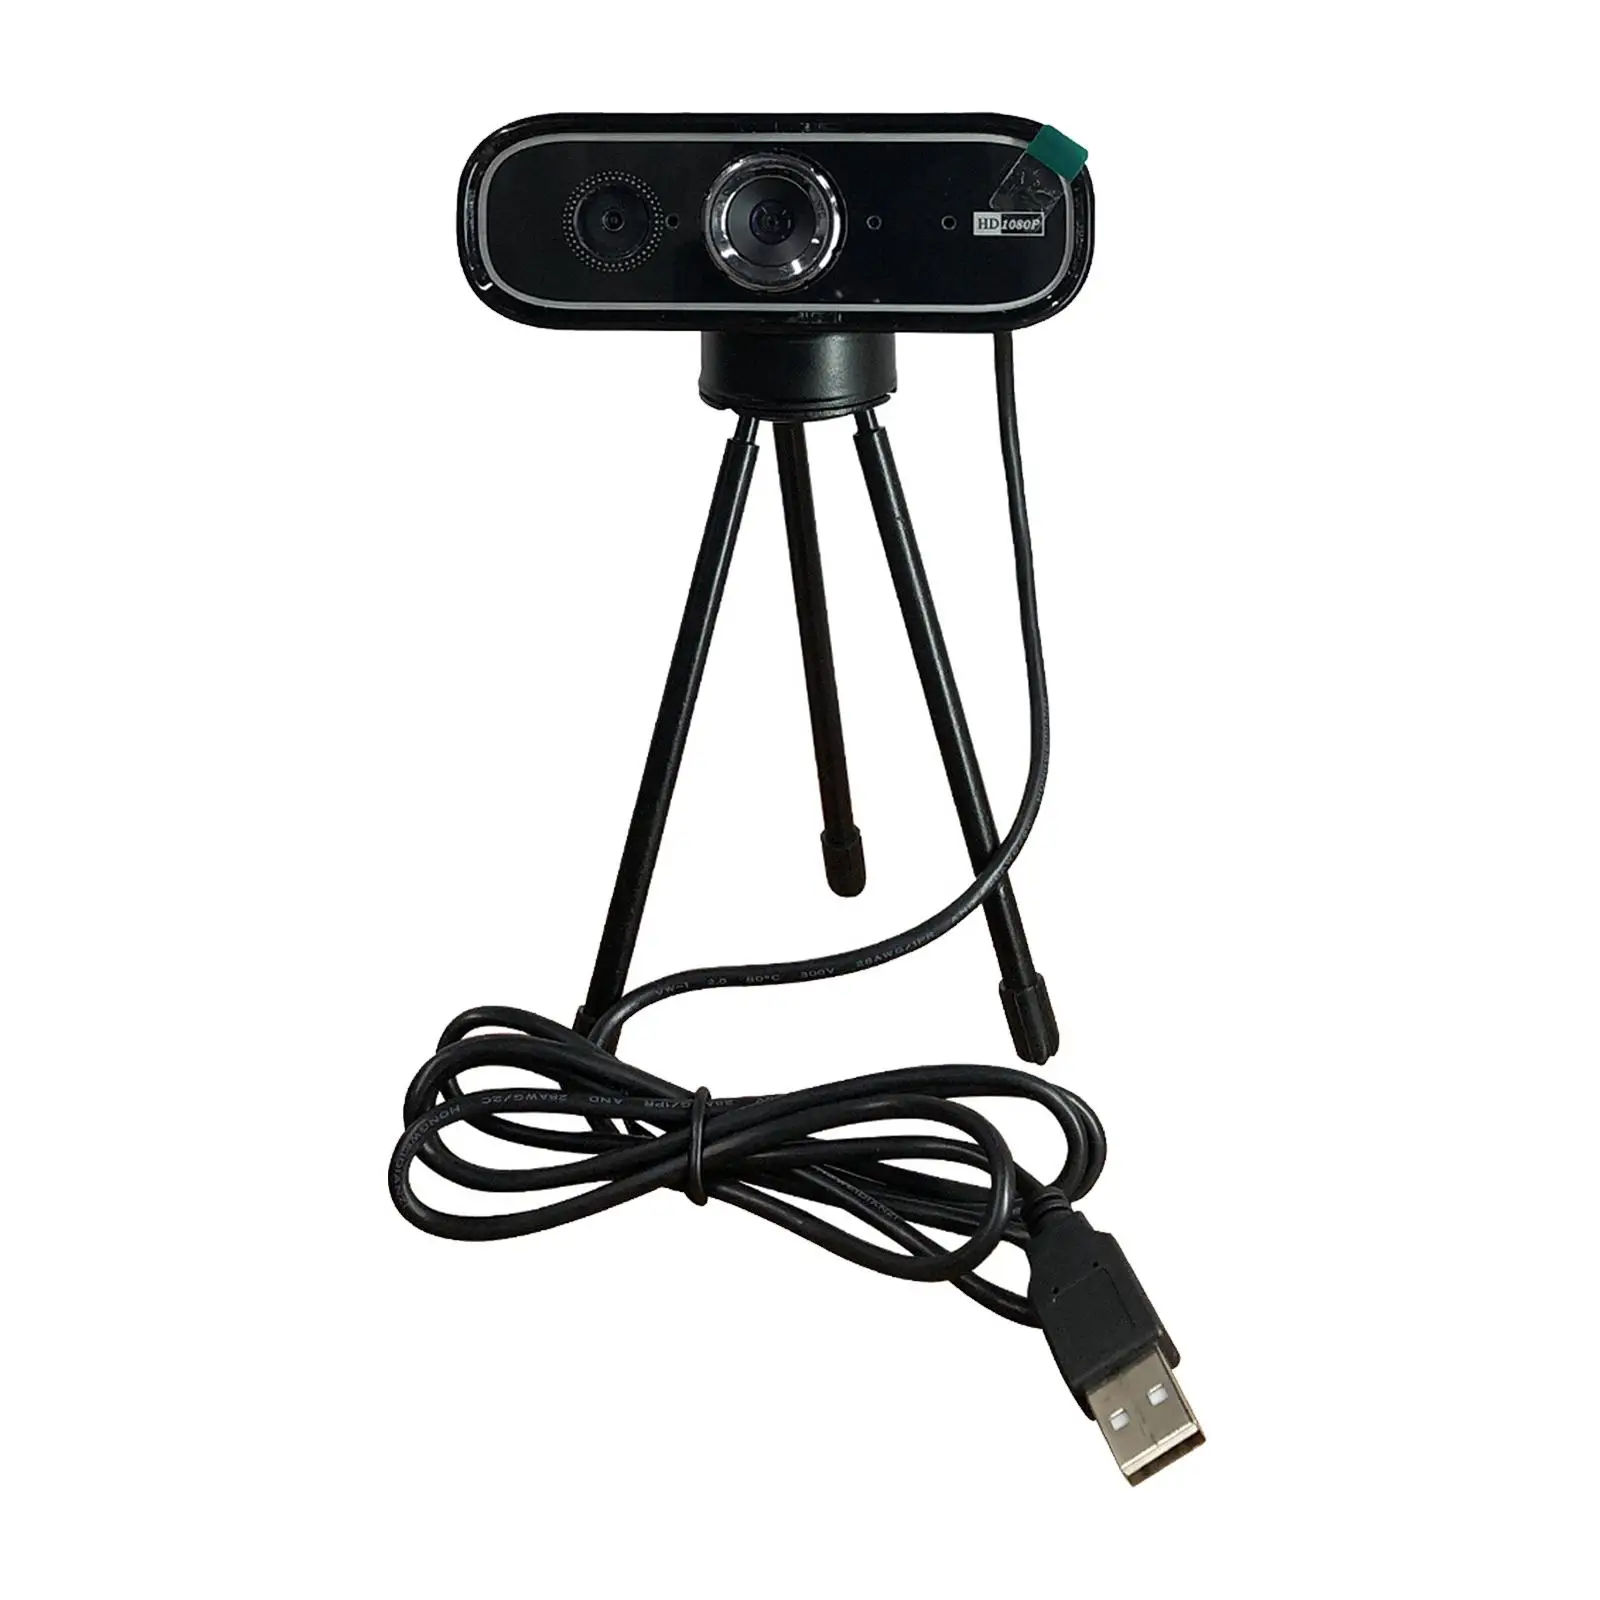 1080P Full USB web camera Cameras with Tripods Adjustable Clip Nanny Camera for Conference Meeting Video Call Online Teaching PC